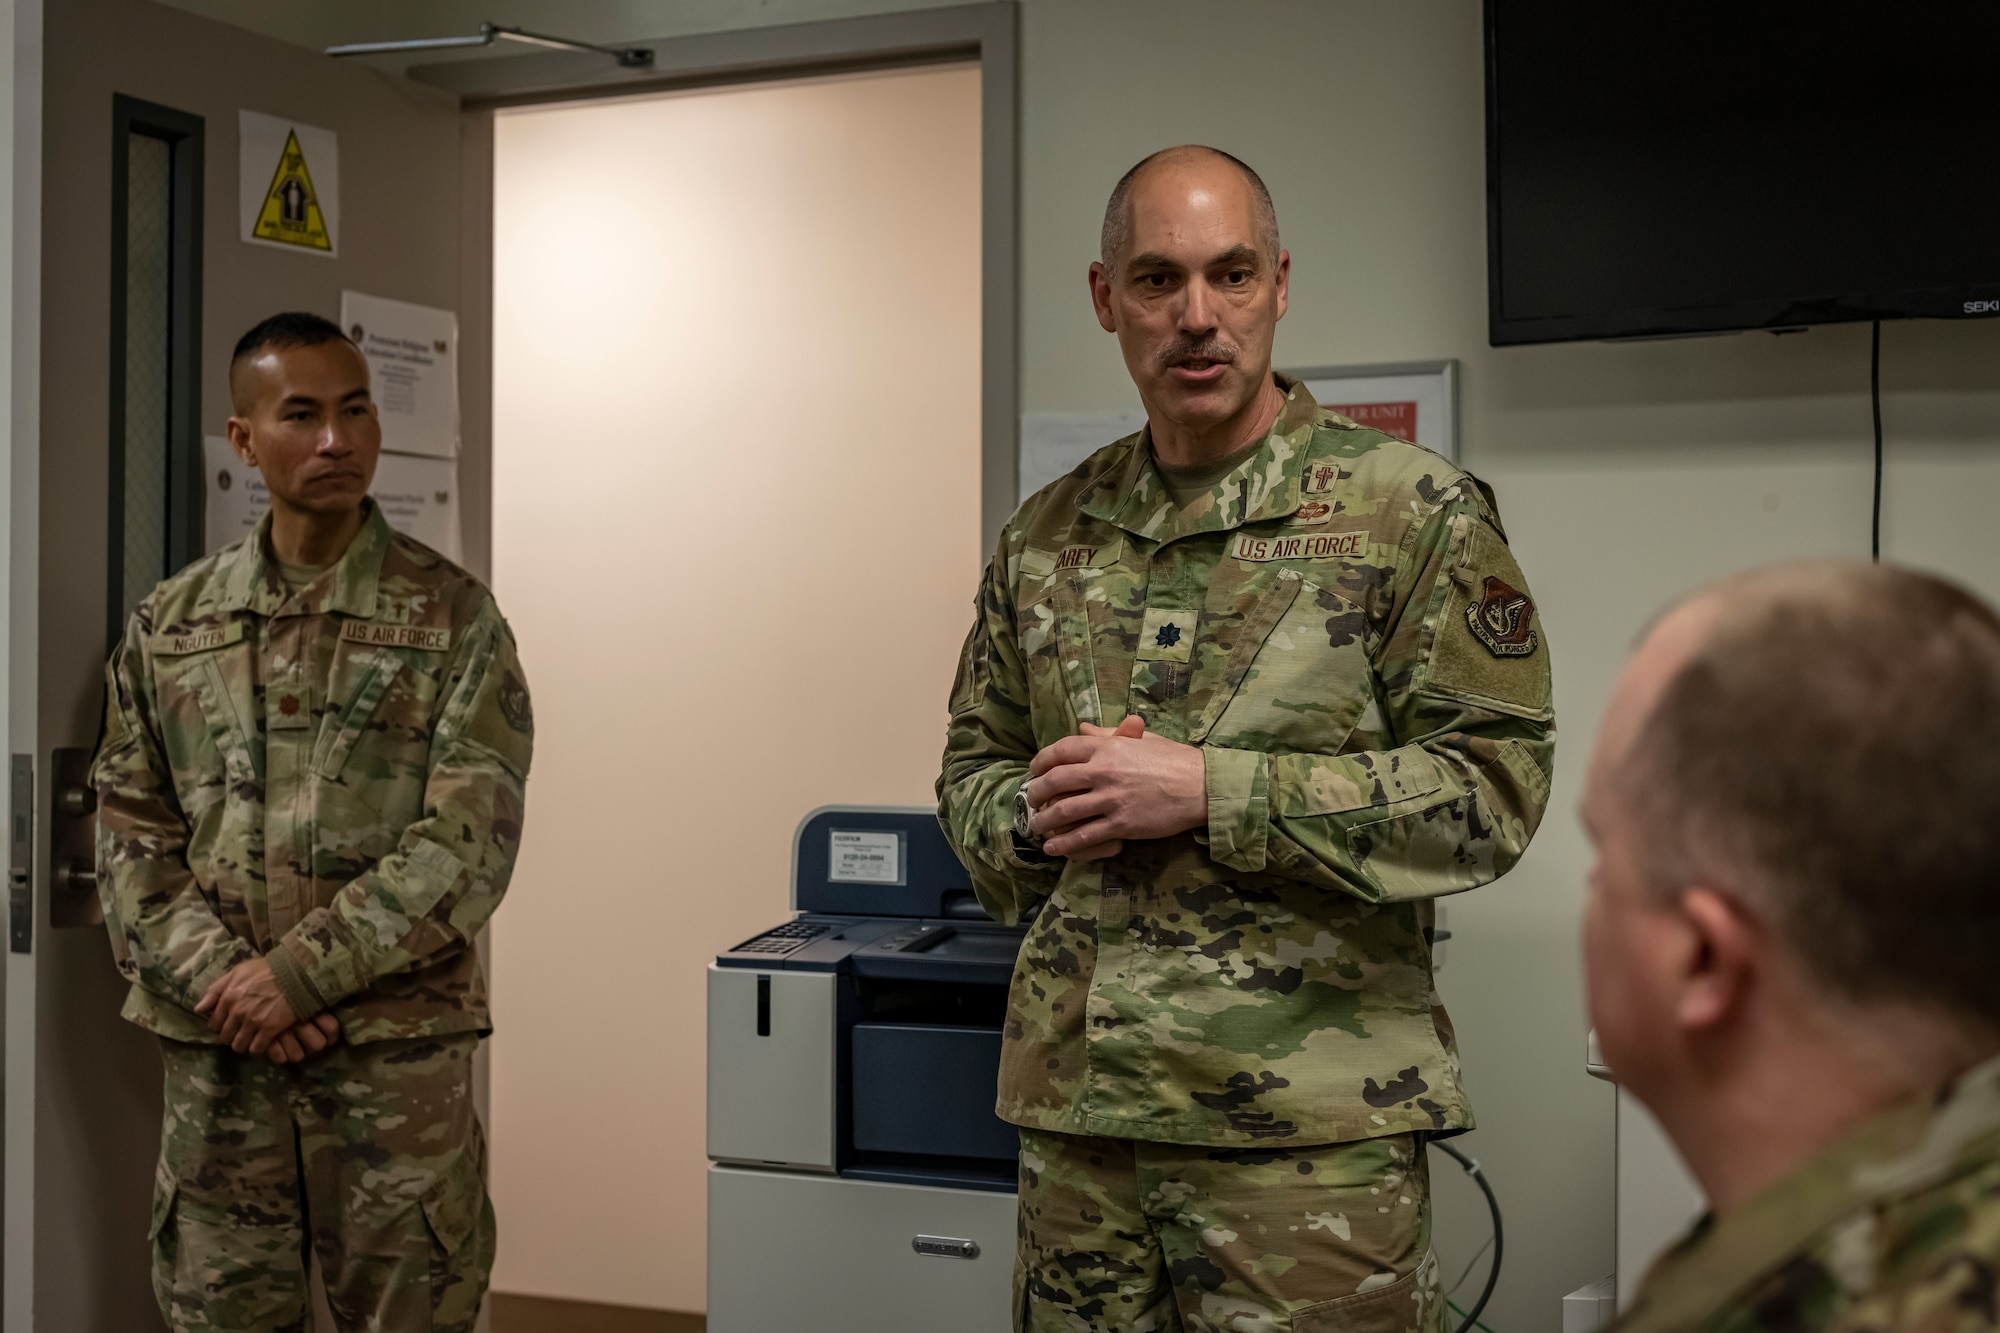 Service member explains how the chaplains and their civilian counterparts work together to provide services to military members and their families.